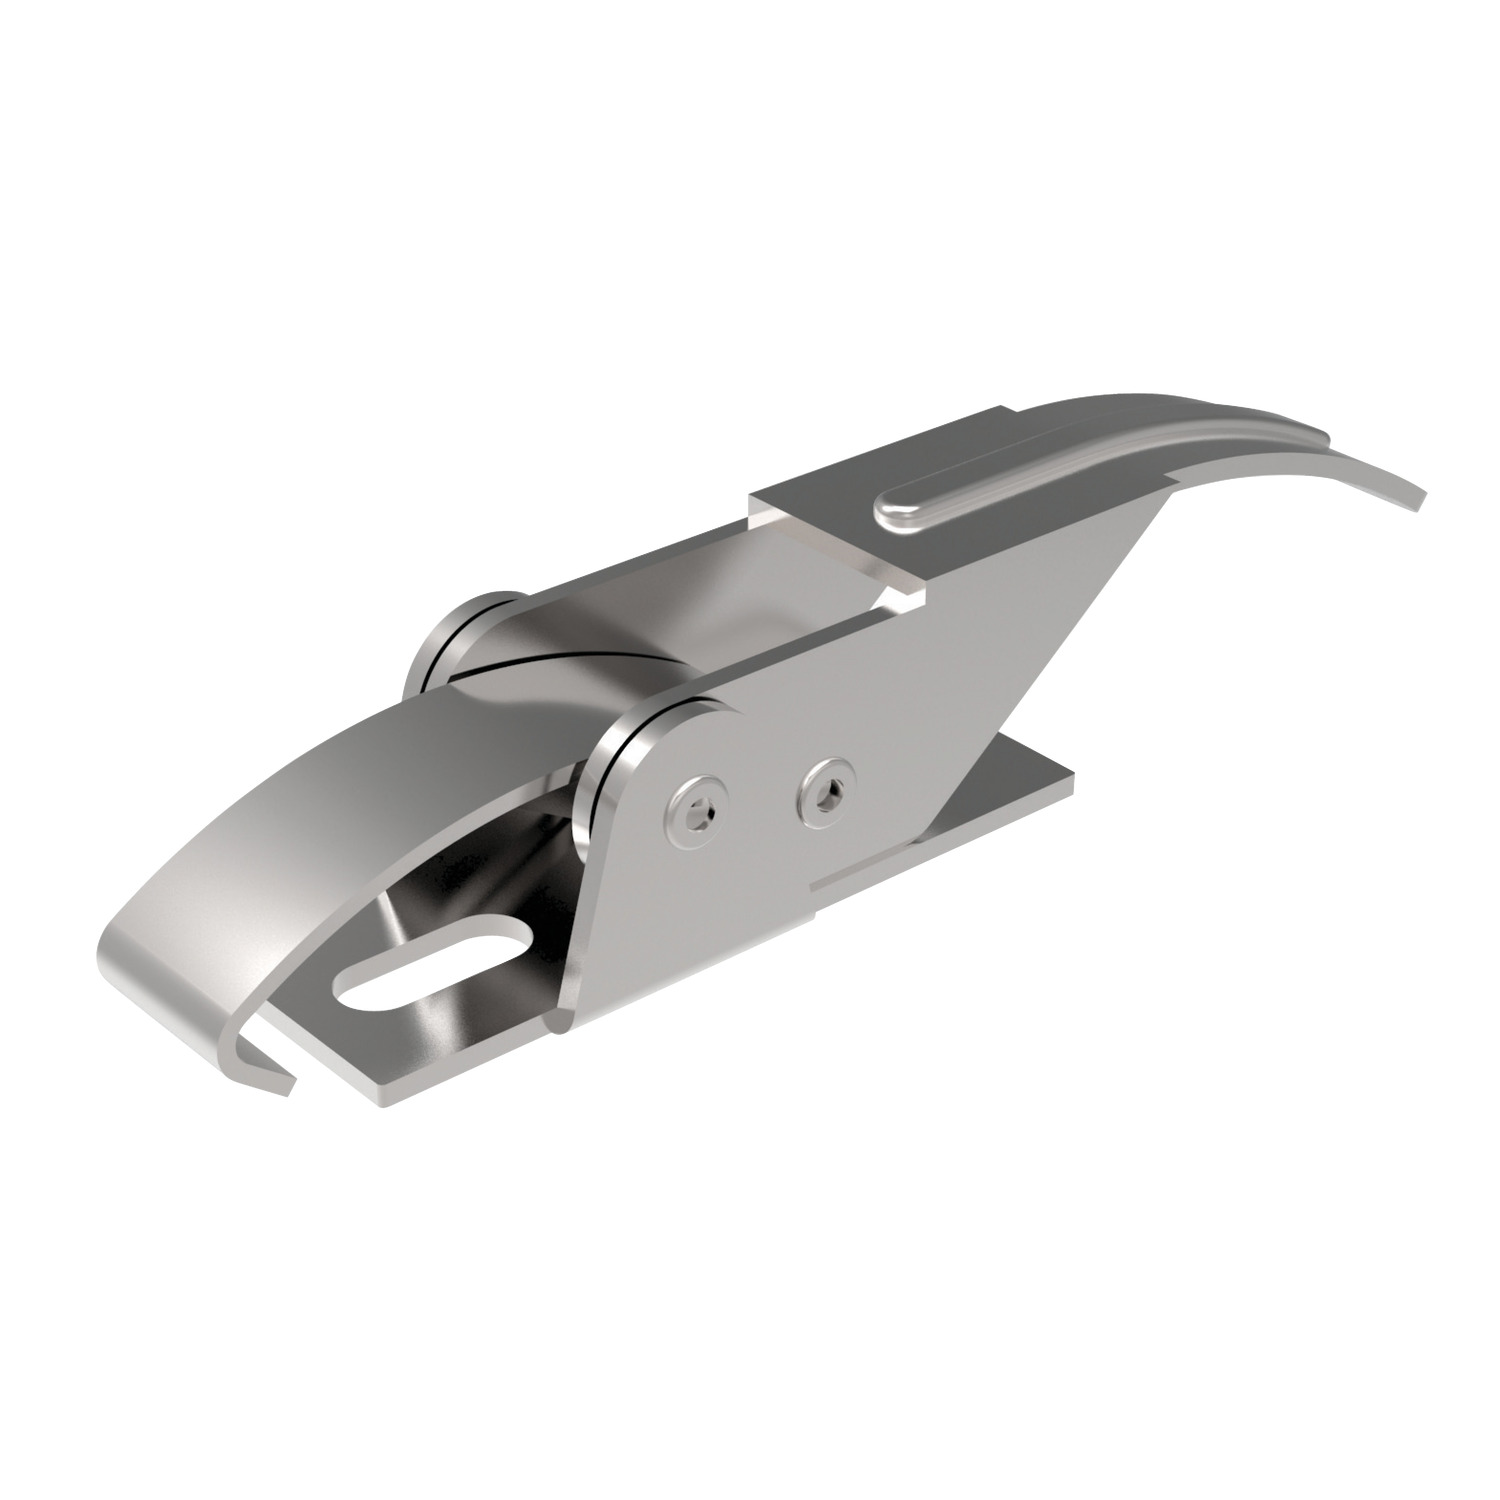 J0558.AC0004 Toggle Latches - Zinc plated steel. Zinc Plated Steel - 128,5 - 27 - 26